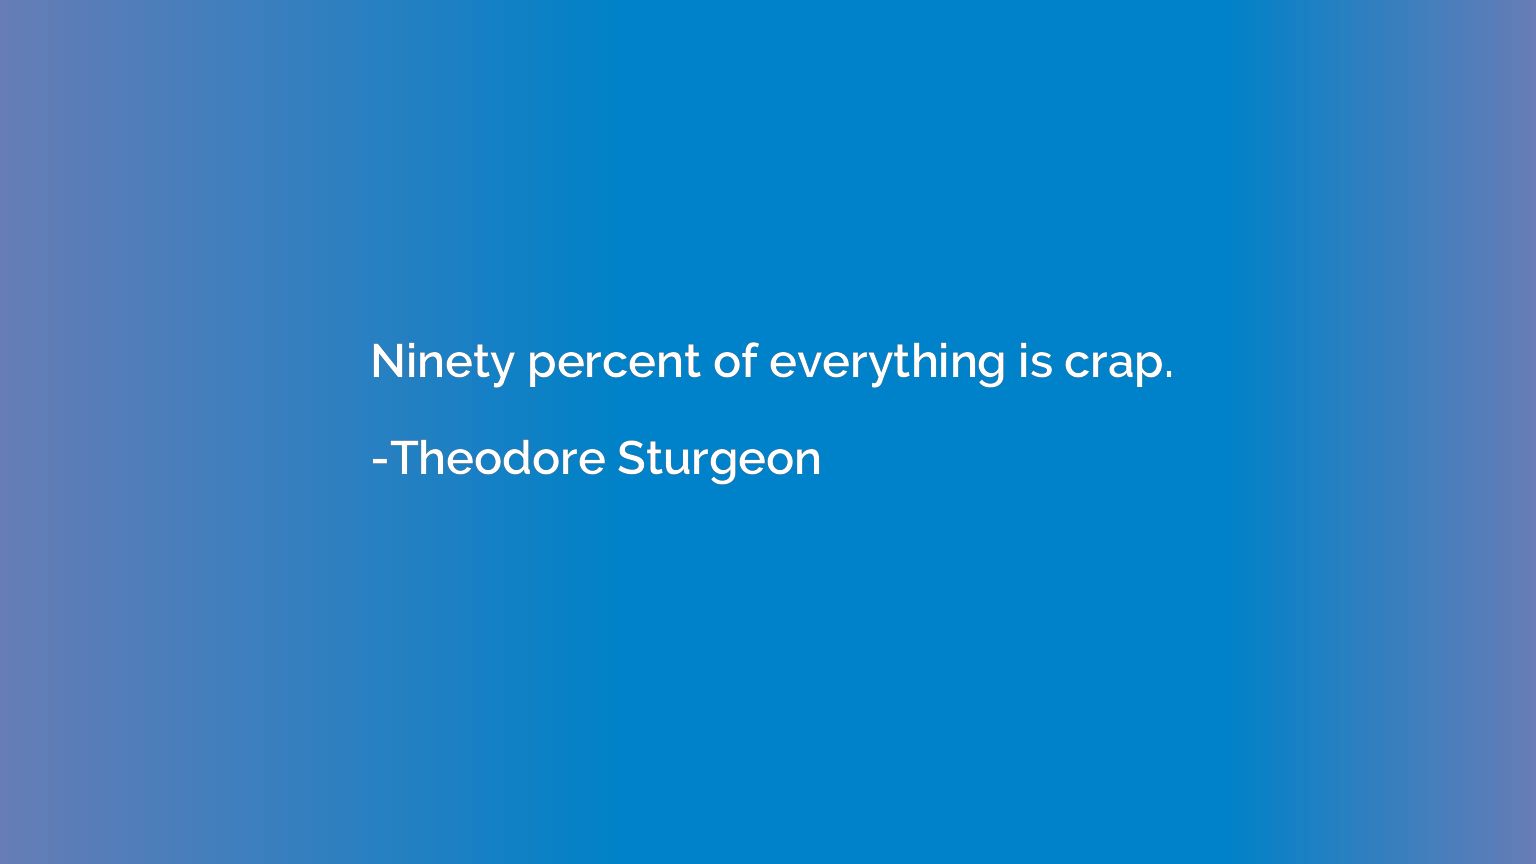 Ninety percent of everything is crap.